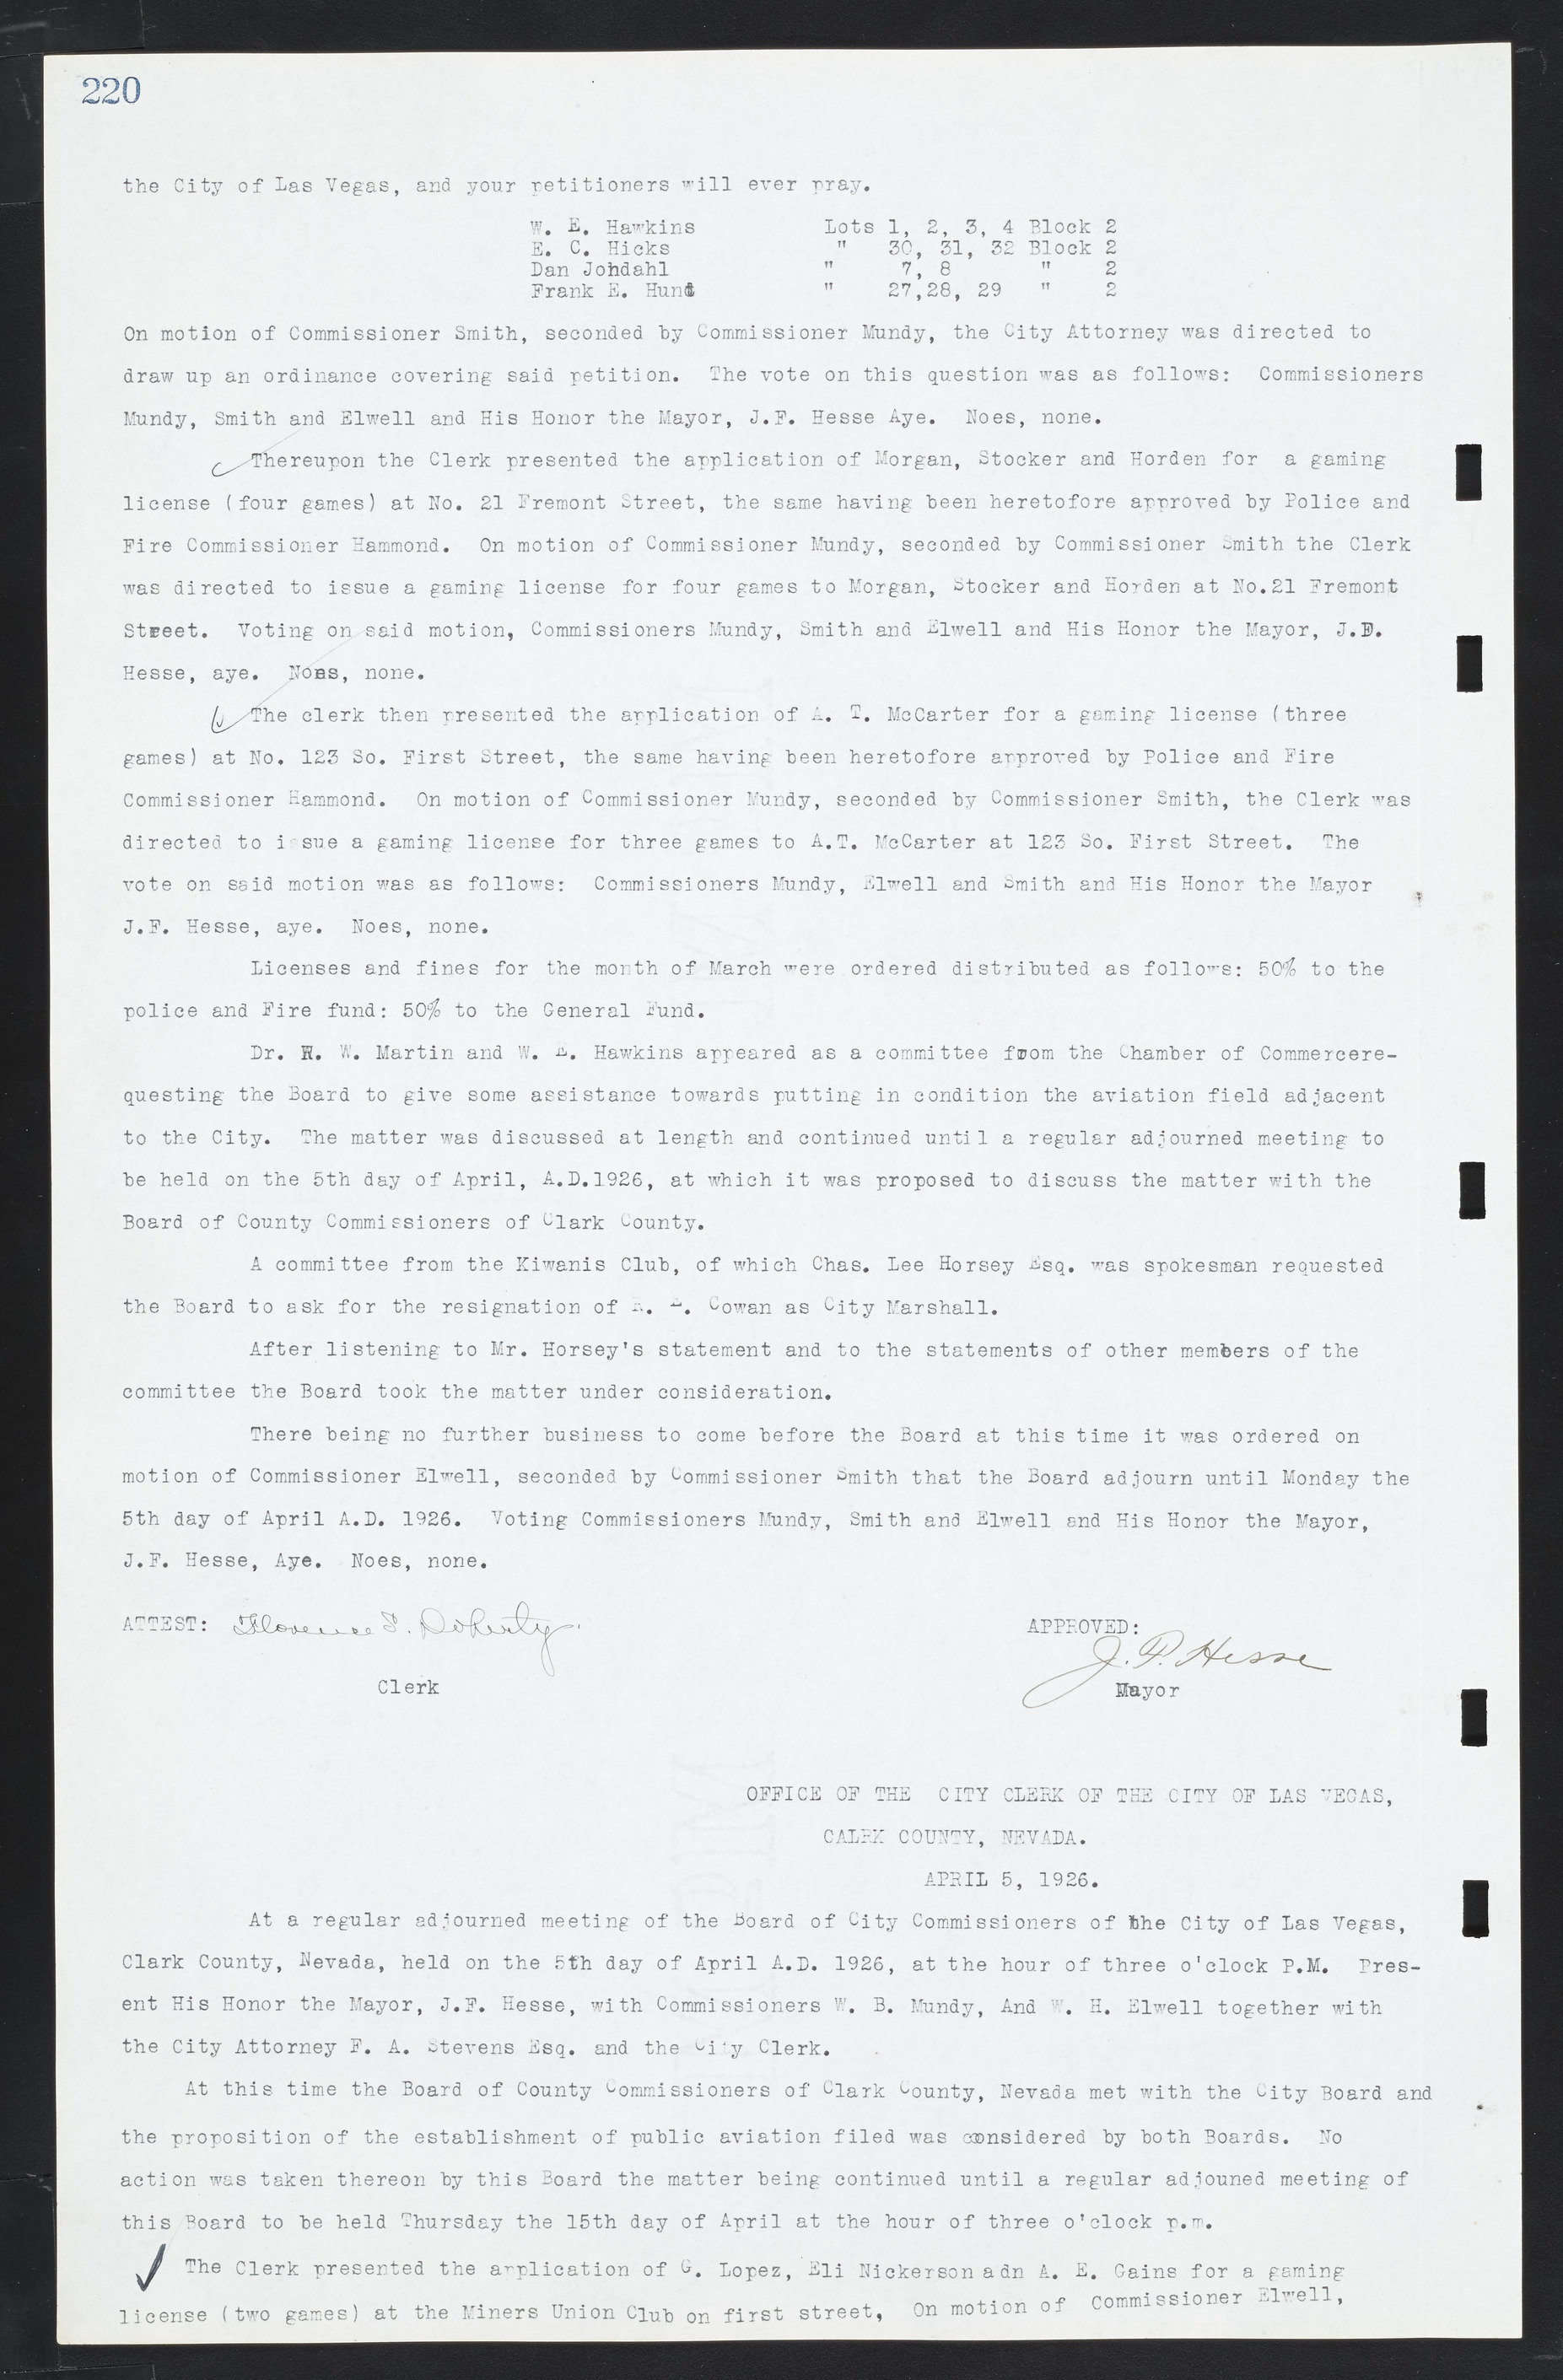 Las Vegas City Commission Minutes, March 1, 1922 to May 10, 1929, lvc000002-227